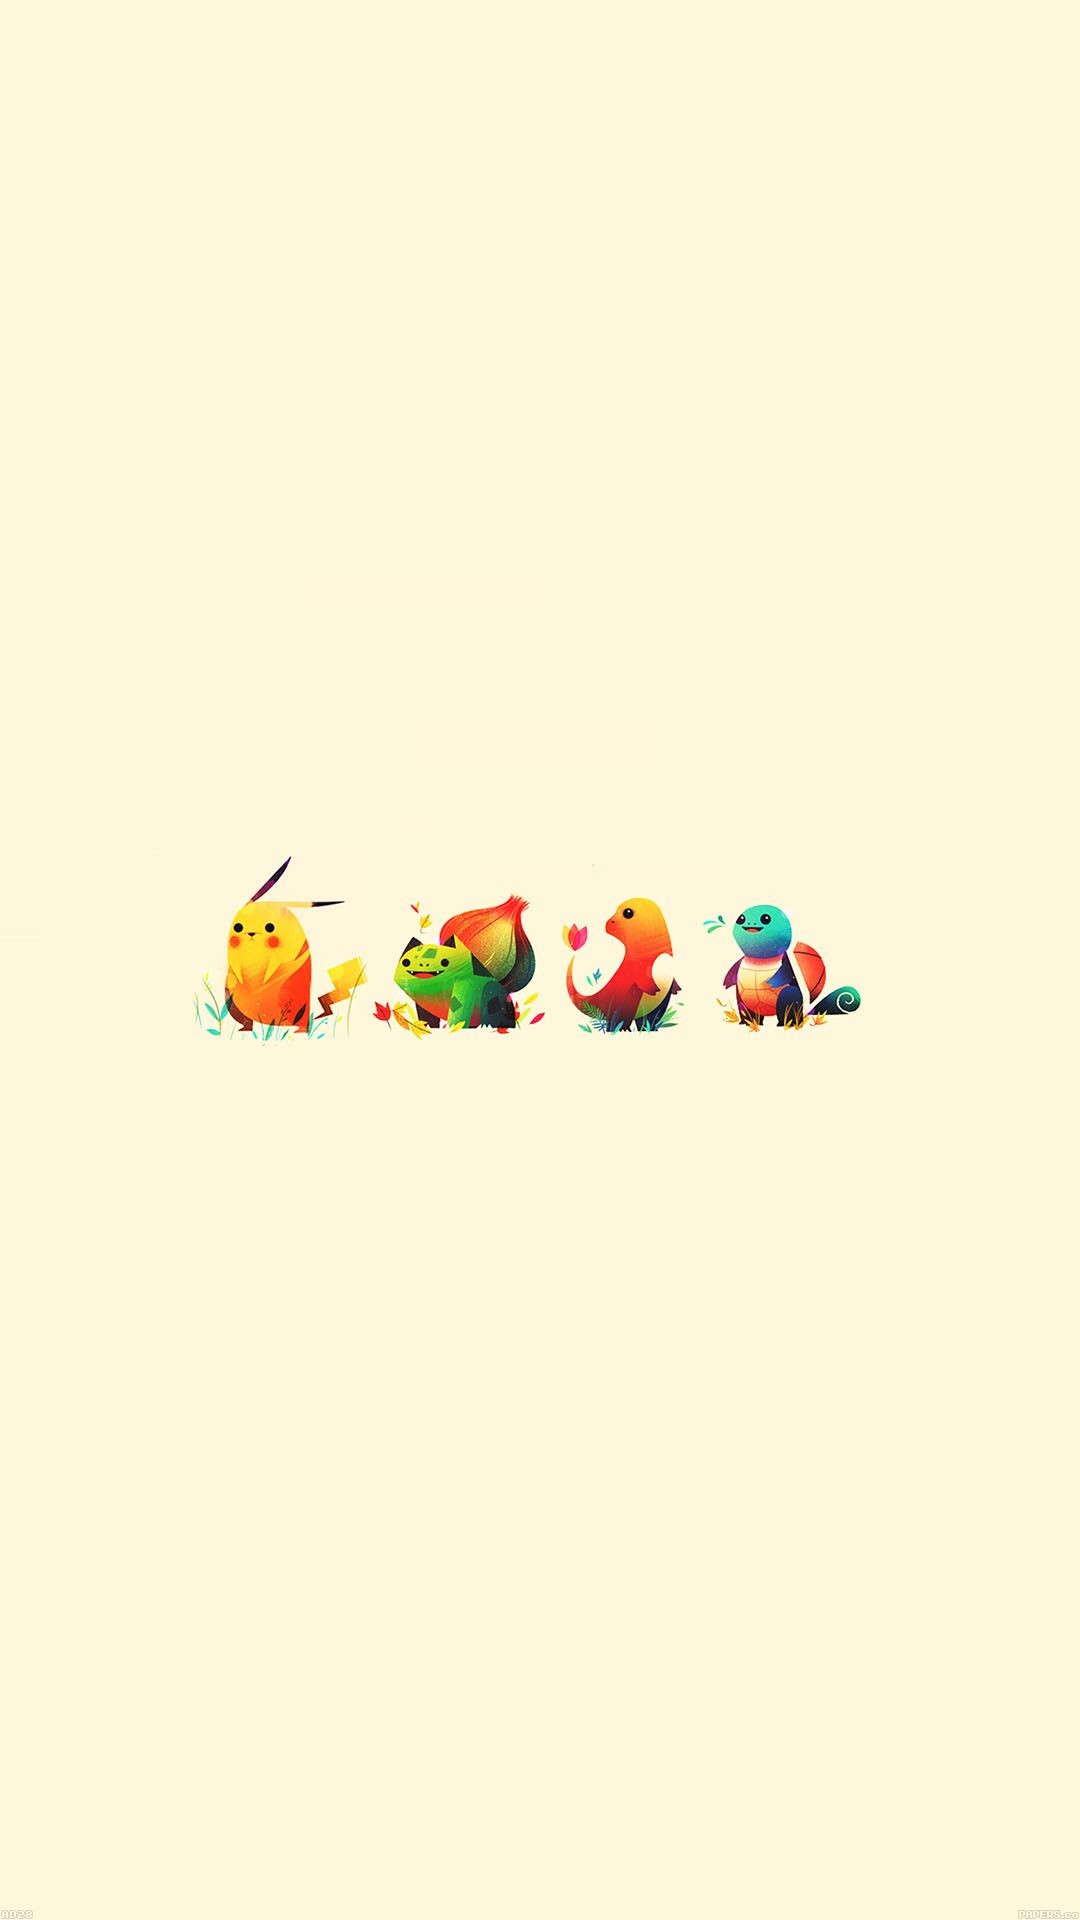 1080x1920 Papers Co Ad28 Cute Pokemon Illust 34 Iphone6 Plus Wallpaper